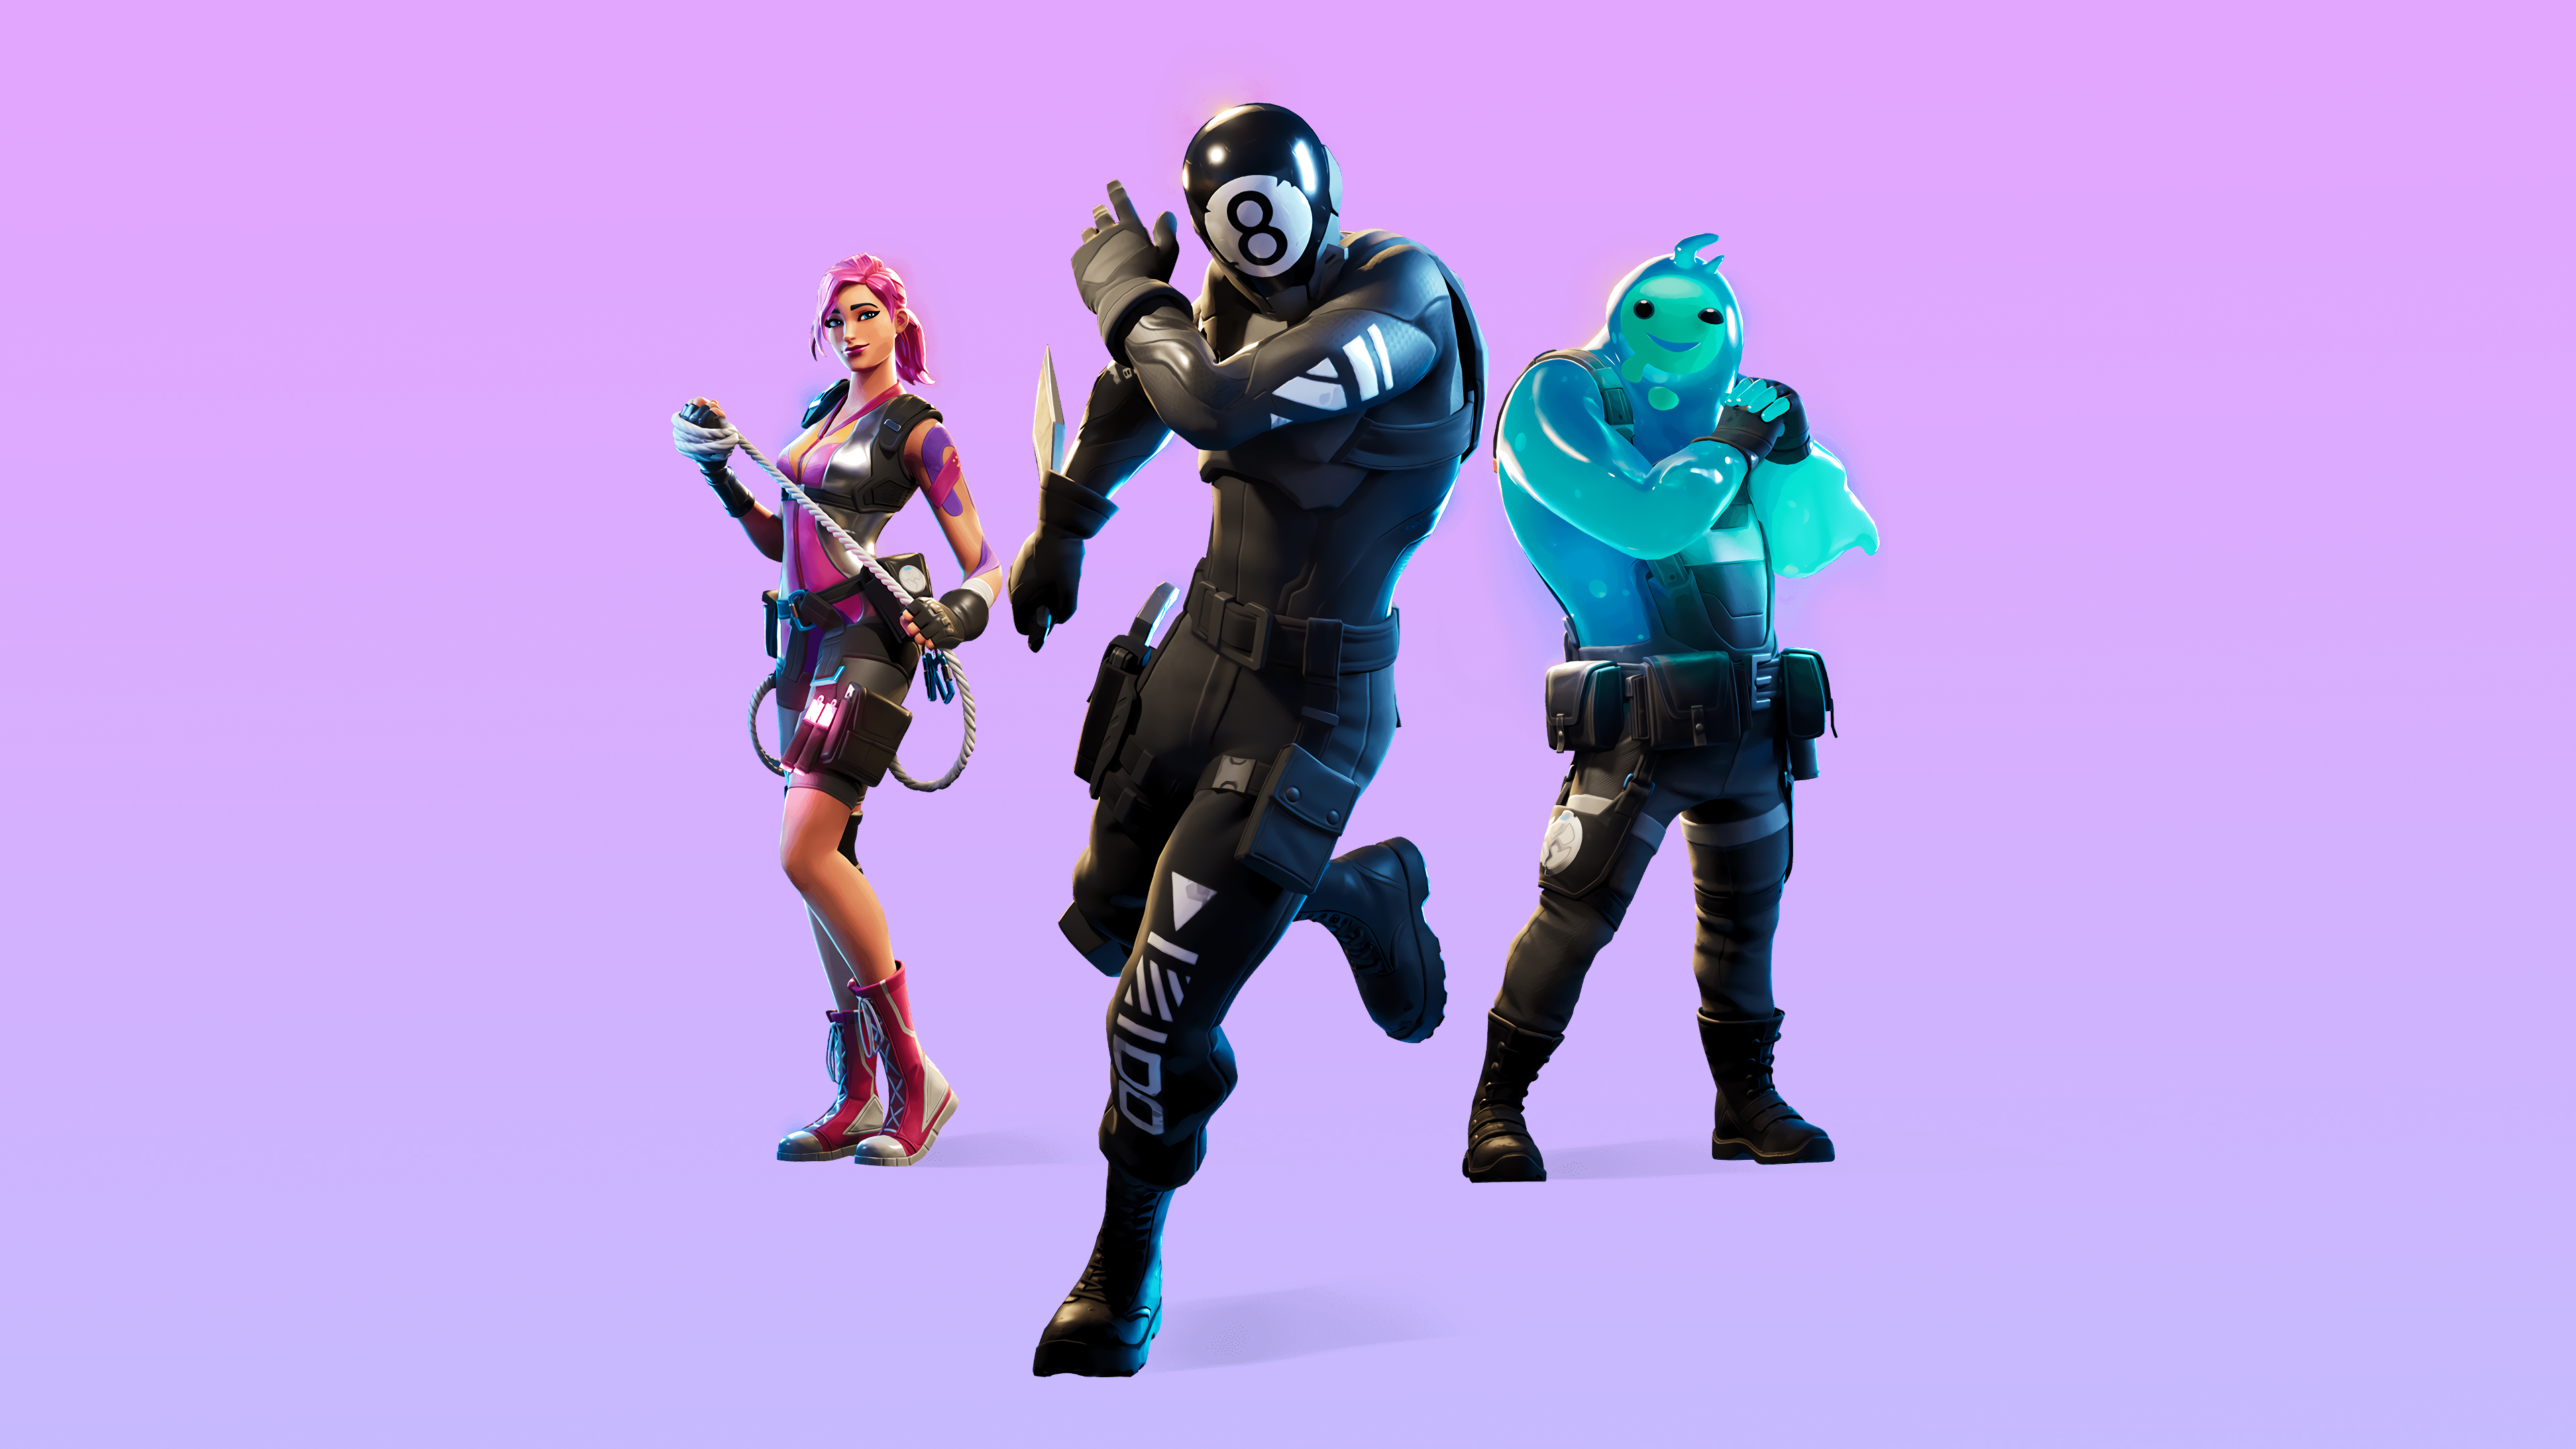 2560x1024 Fortnite Chapter 2 Season 1 Battle Pass Skins 2560x1024 Resolution Wallpaper Hd Games 4k Wallpapers Images Photos And Background Wallpapers Den